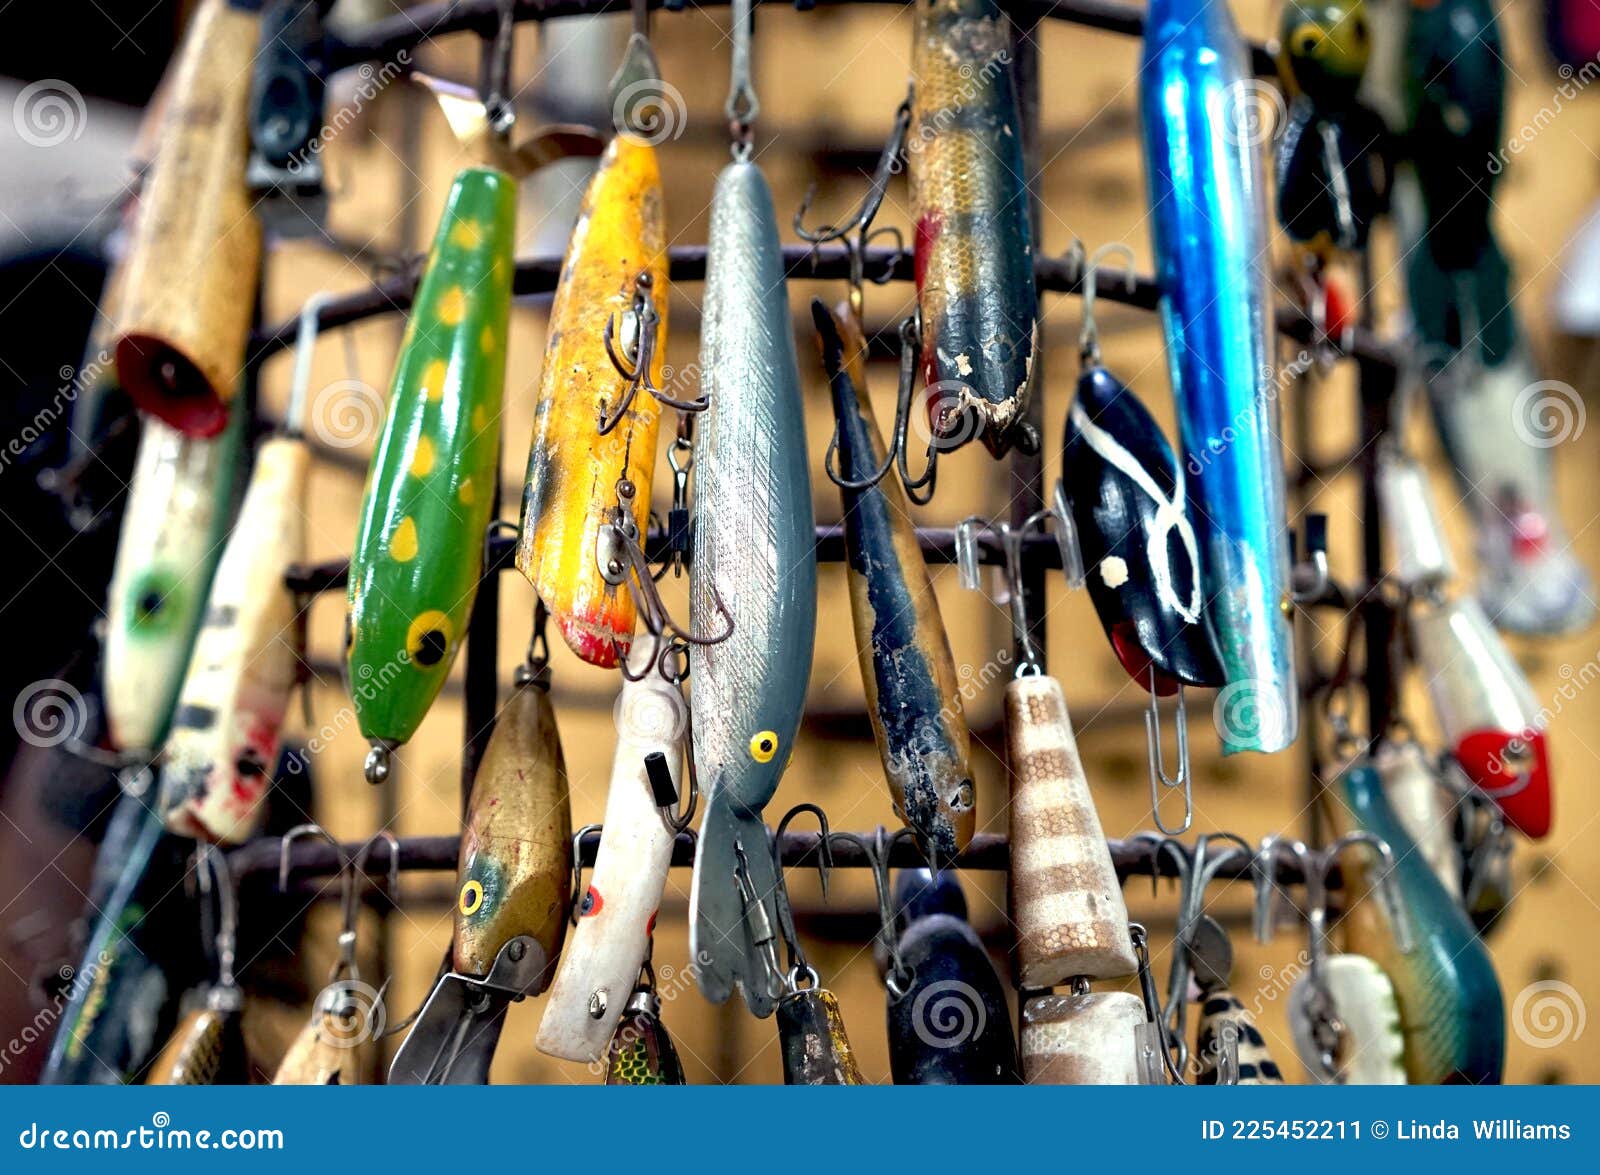 Collectible Vintage Fishing Lures Stock Image - Image of